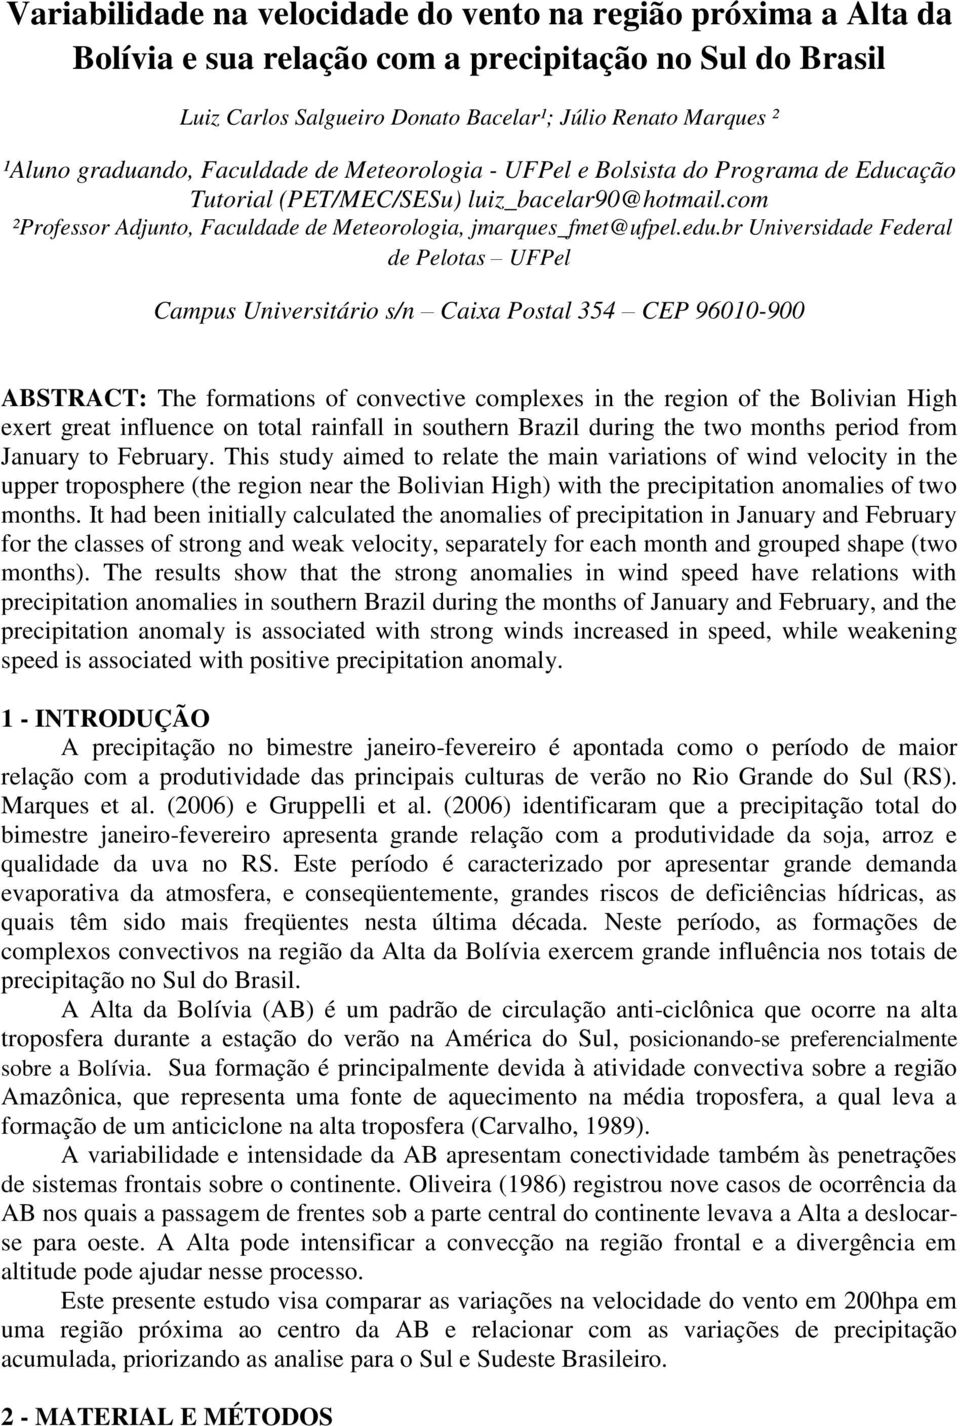 edu.br Universidade Federal de Pelotas UFPel Campus Universitário s/n Caixa Postal 354 CEP 96010-900 ABSTRACT: The formations of convective complexes in the region of the Bolivian High exert great